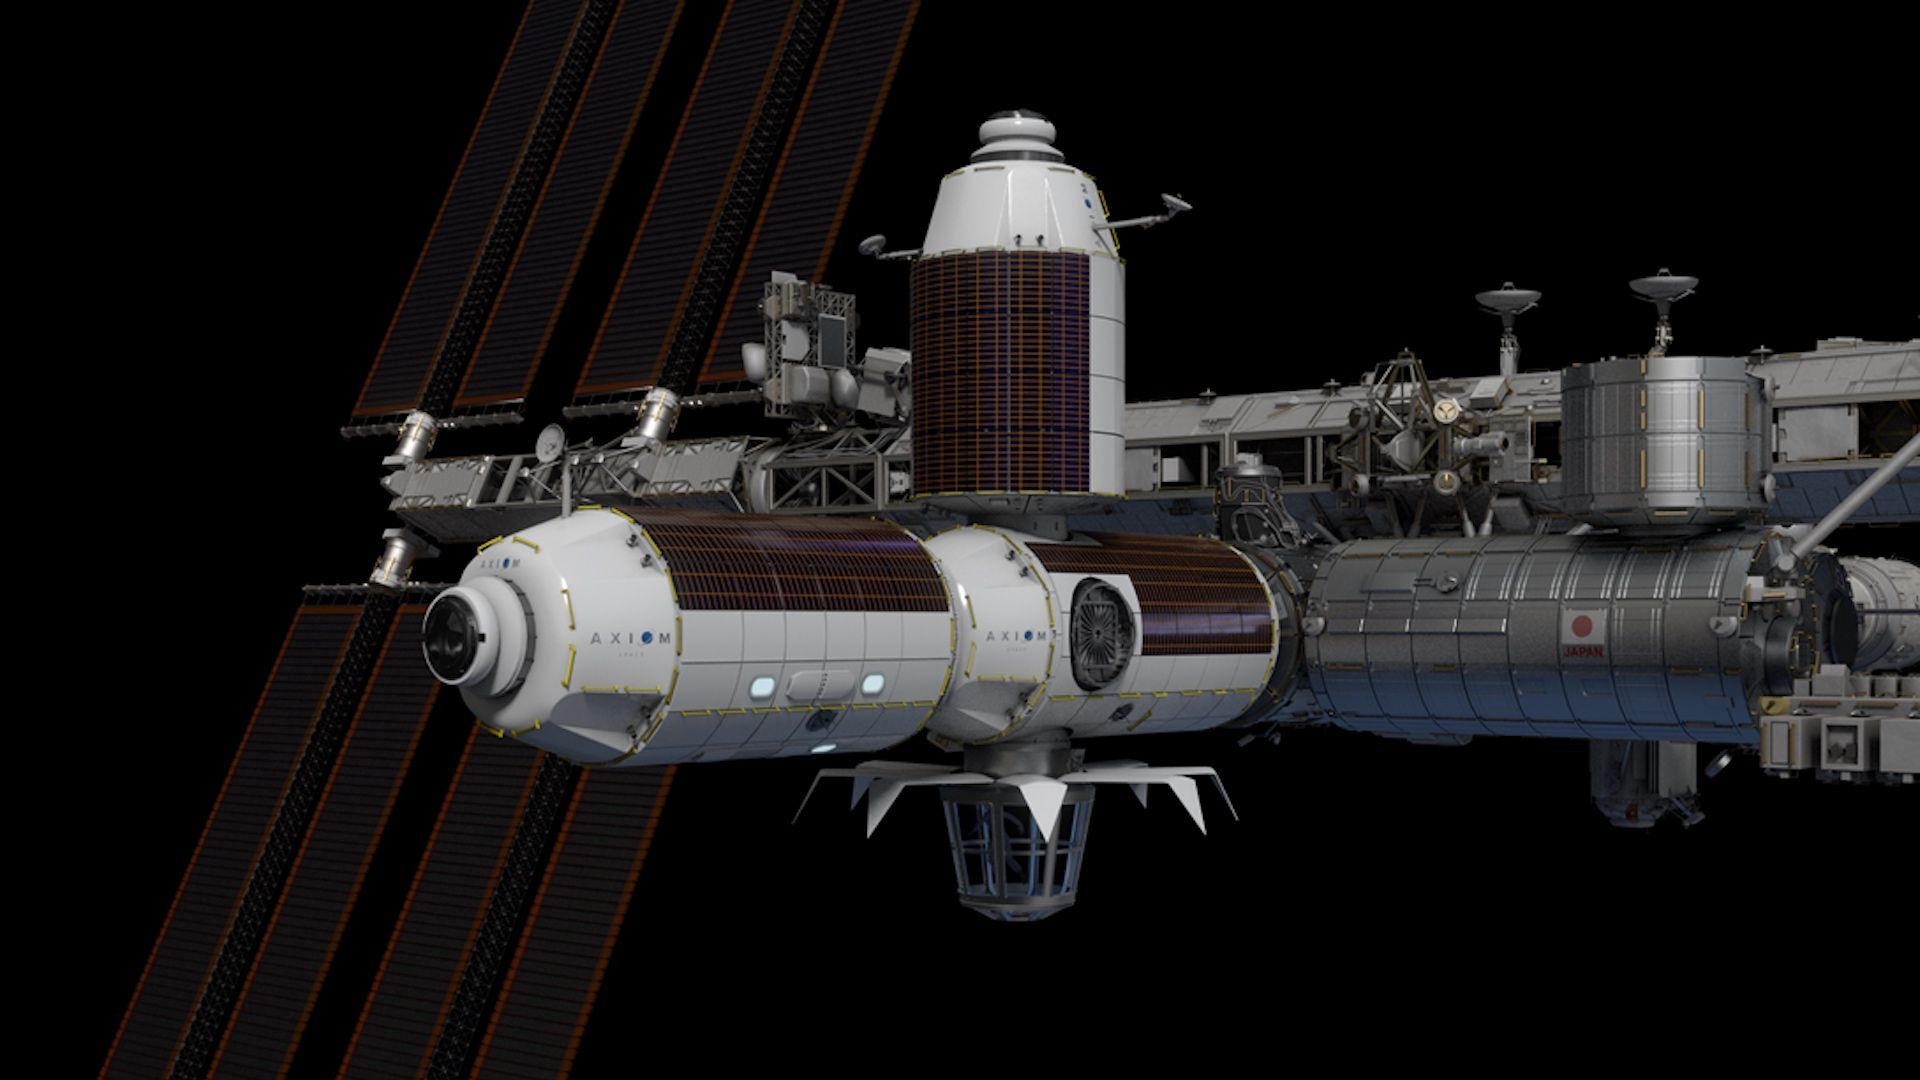 Artist's illustration showing new modules attached to the International Space Station